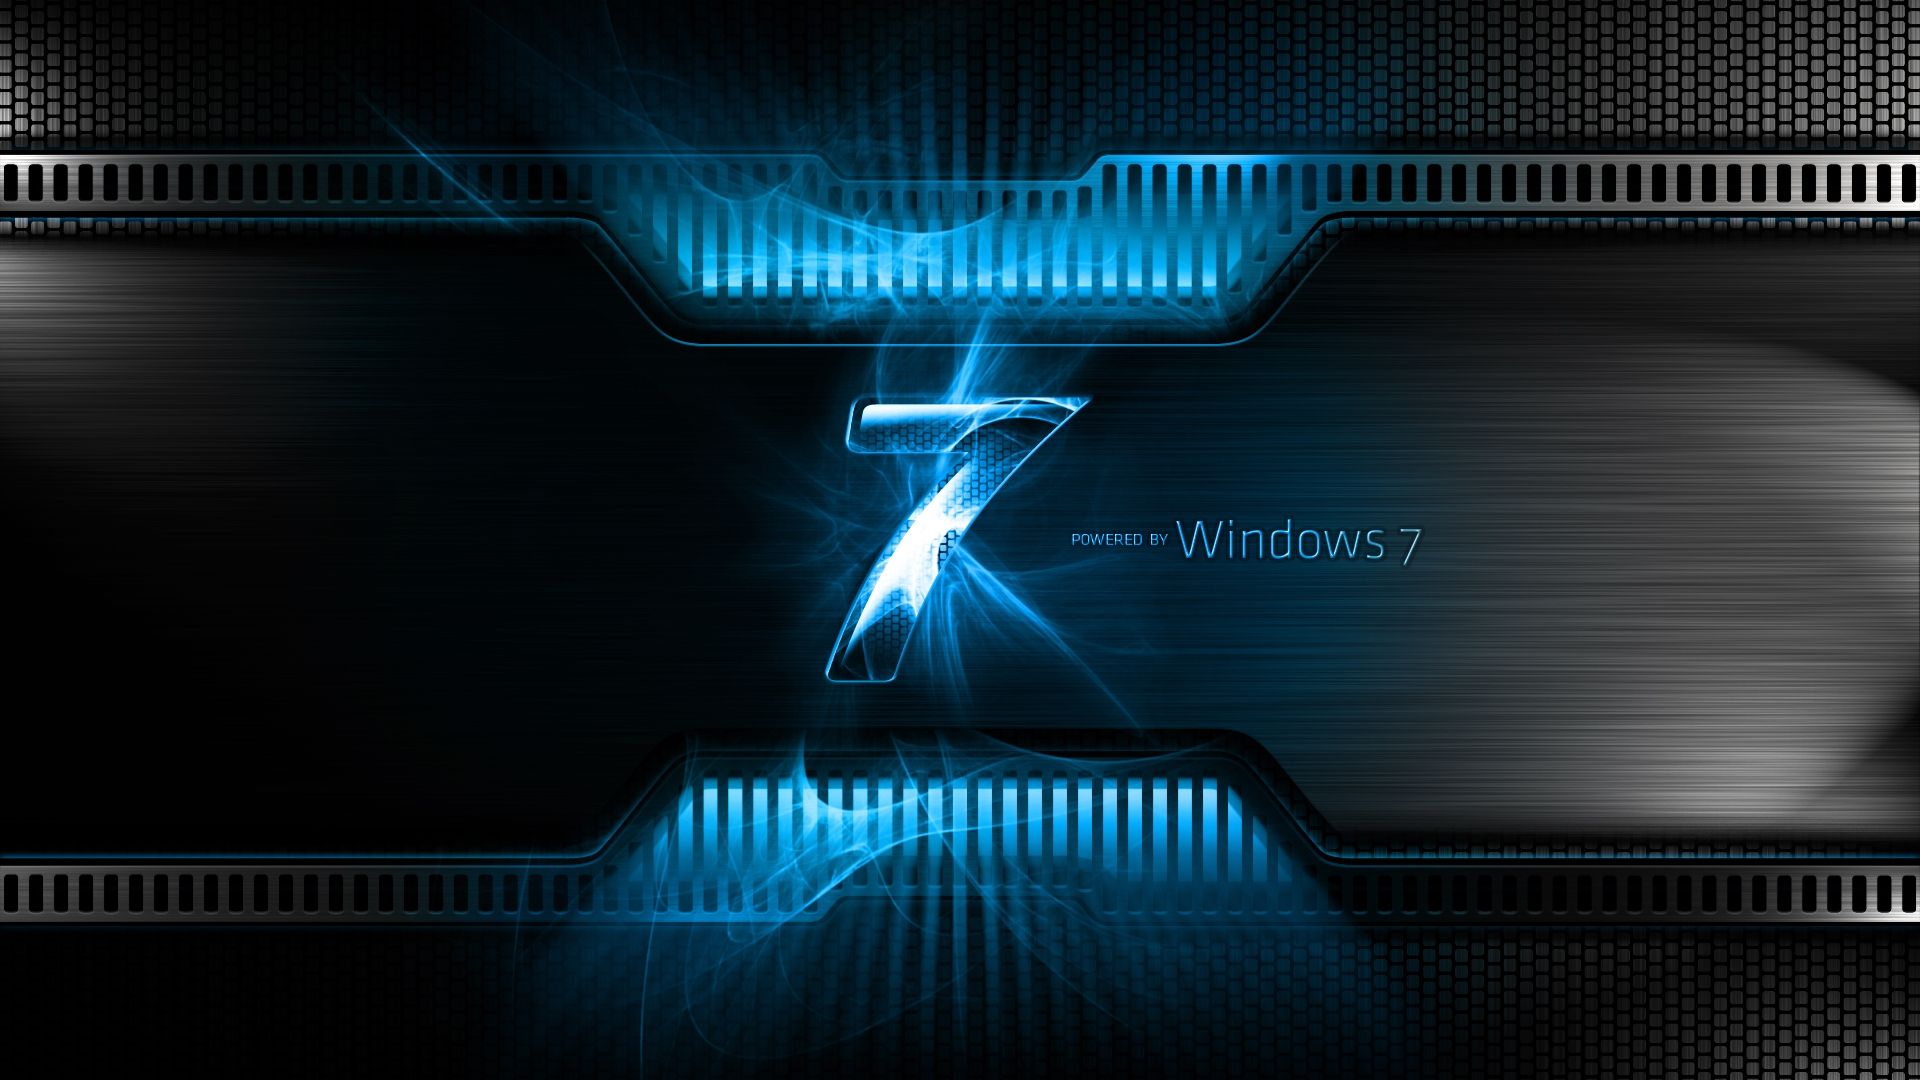 Background For Windows 7 - HD Wallpaper 